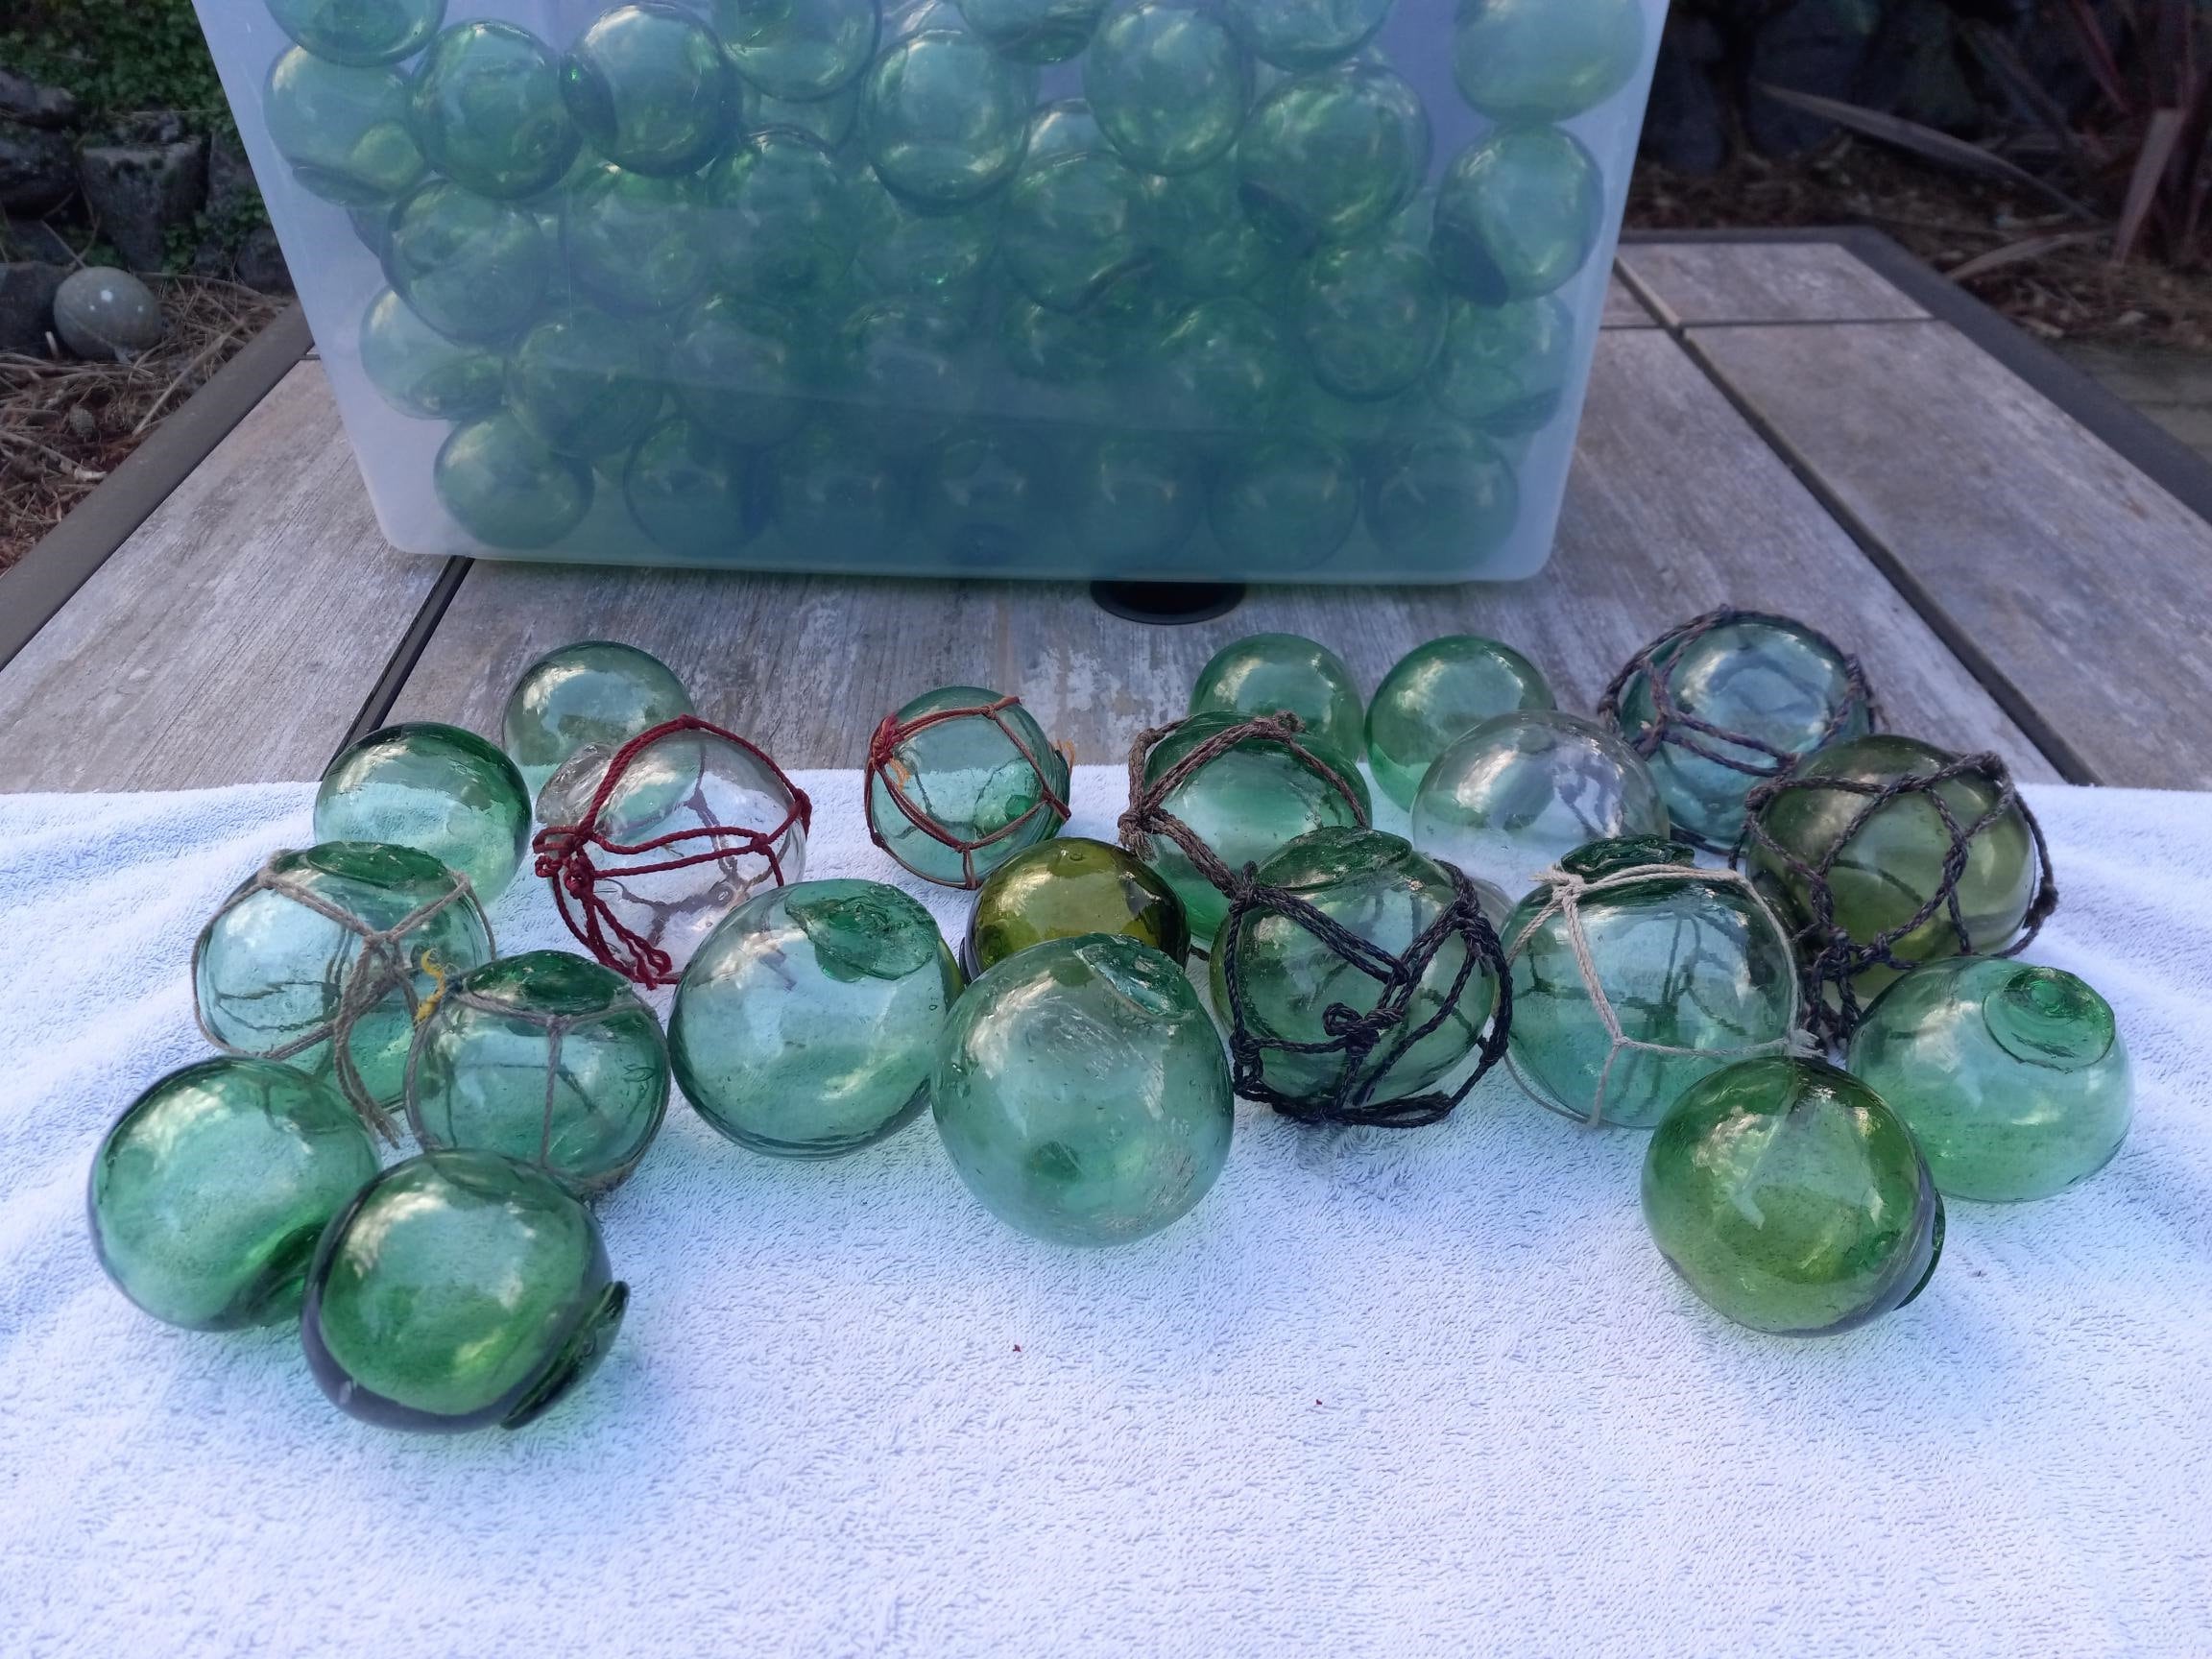 Authentic vintage Japanese glass fishing floats $30 each 4 inch diameter  Available in shades of aqua-blue and green Mix and match your f